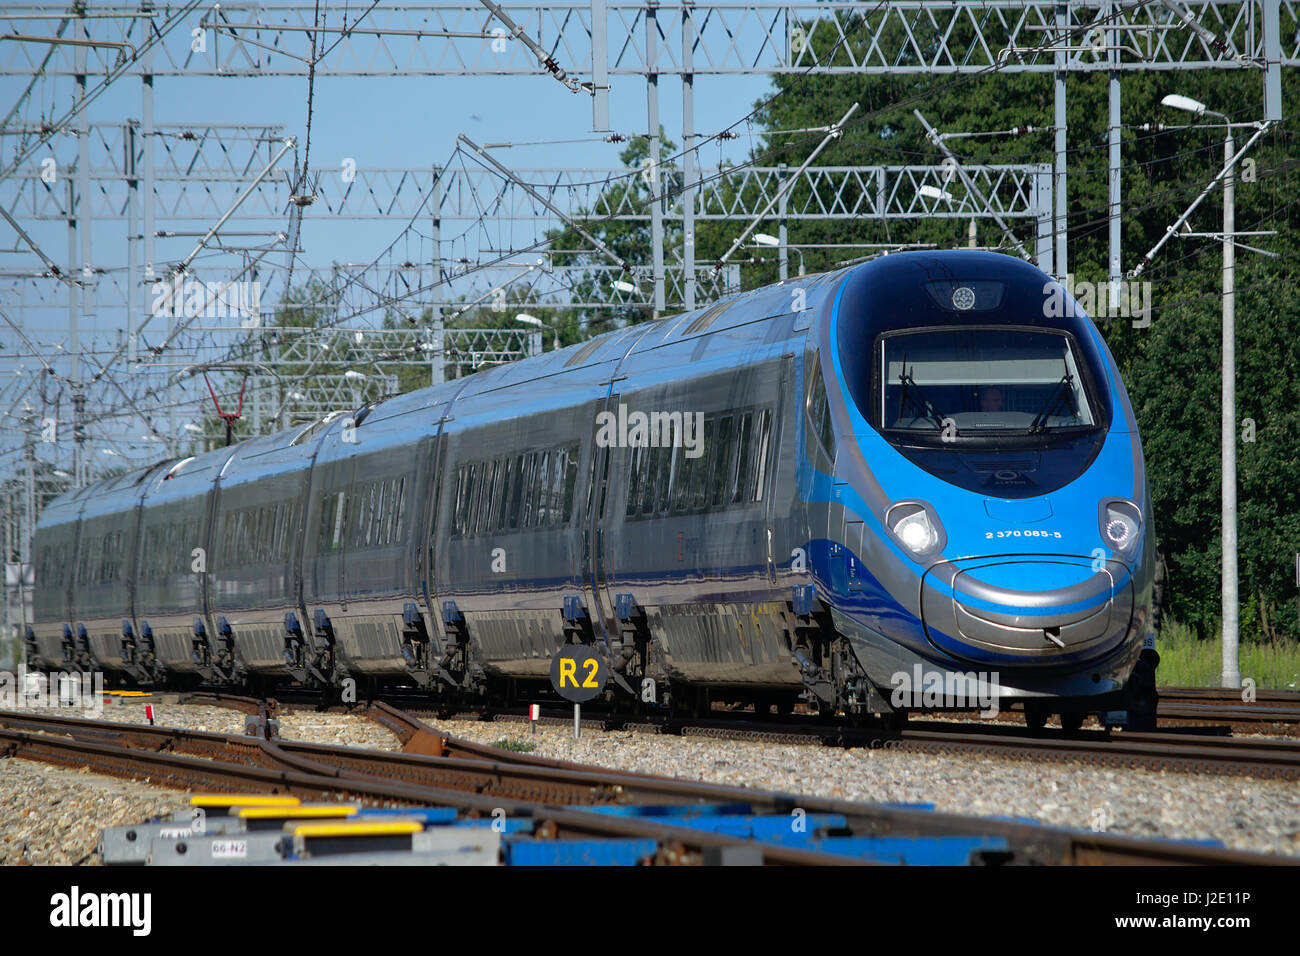 POLAND - July 21, 2016: ETR610 Pendolino fast train operated by PKP Intercity. Stock Photo